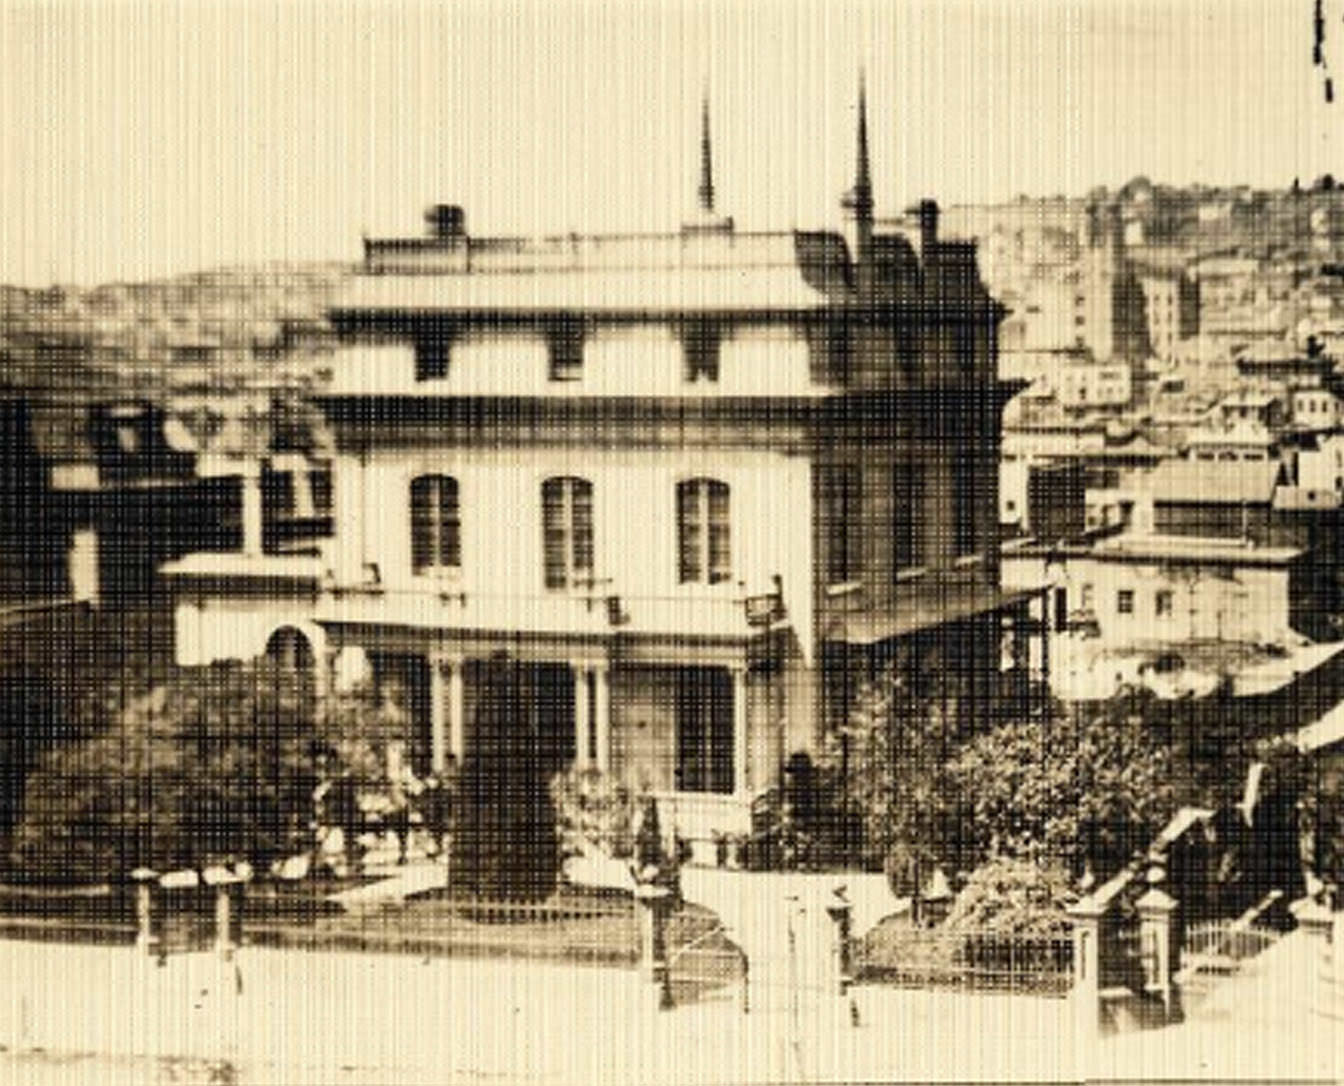 Parrott mansion located on Rincon Hill, 1854